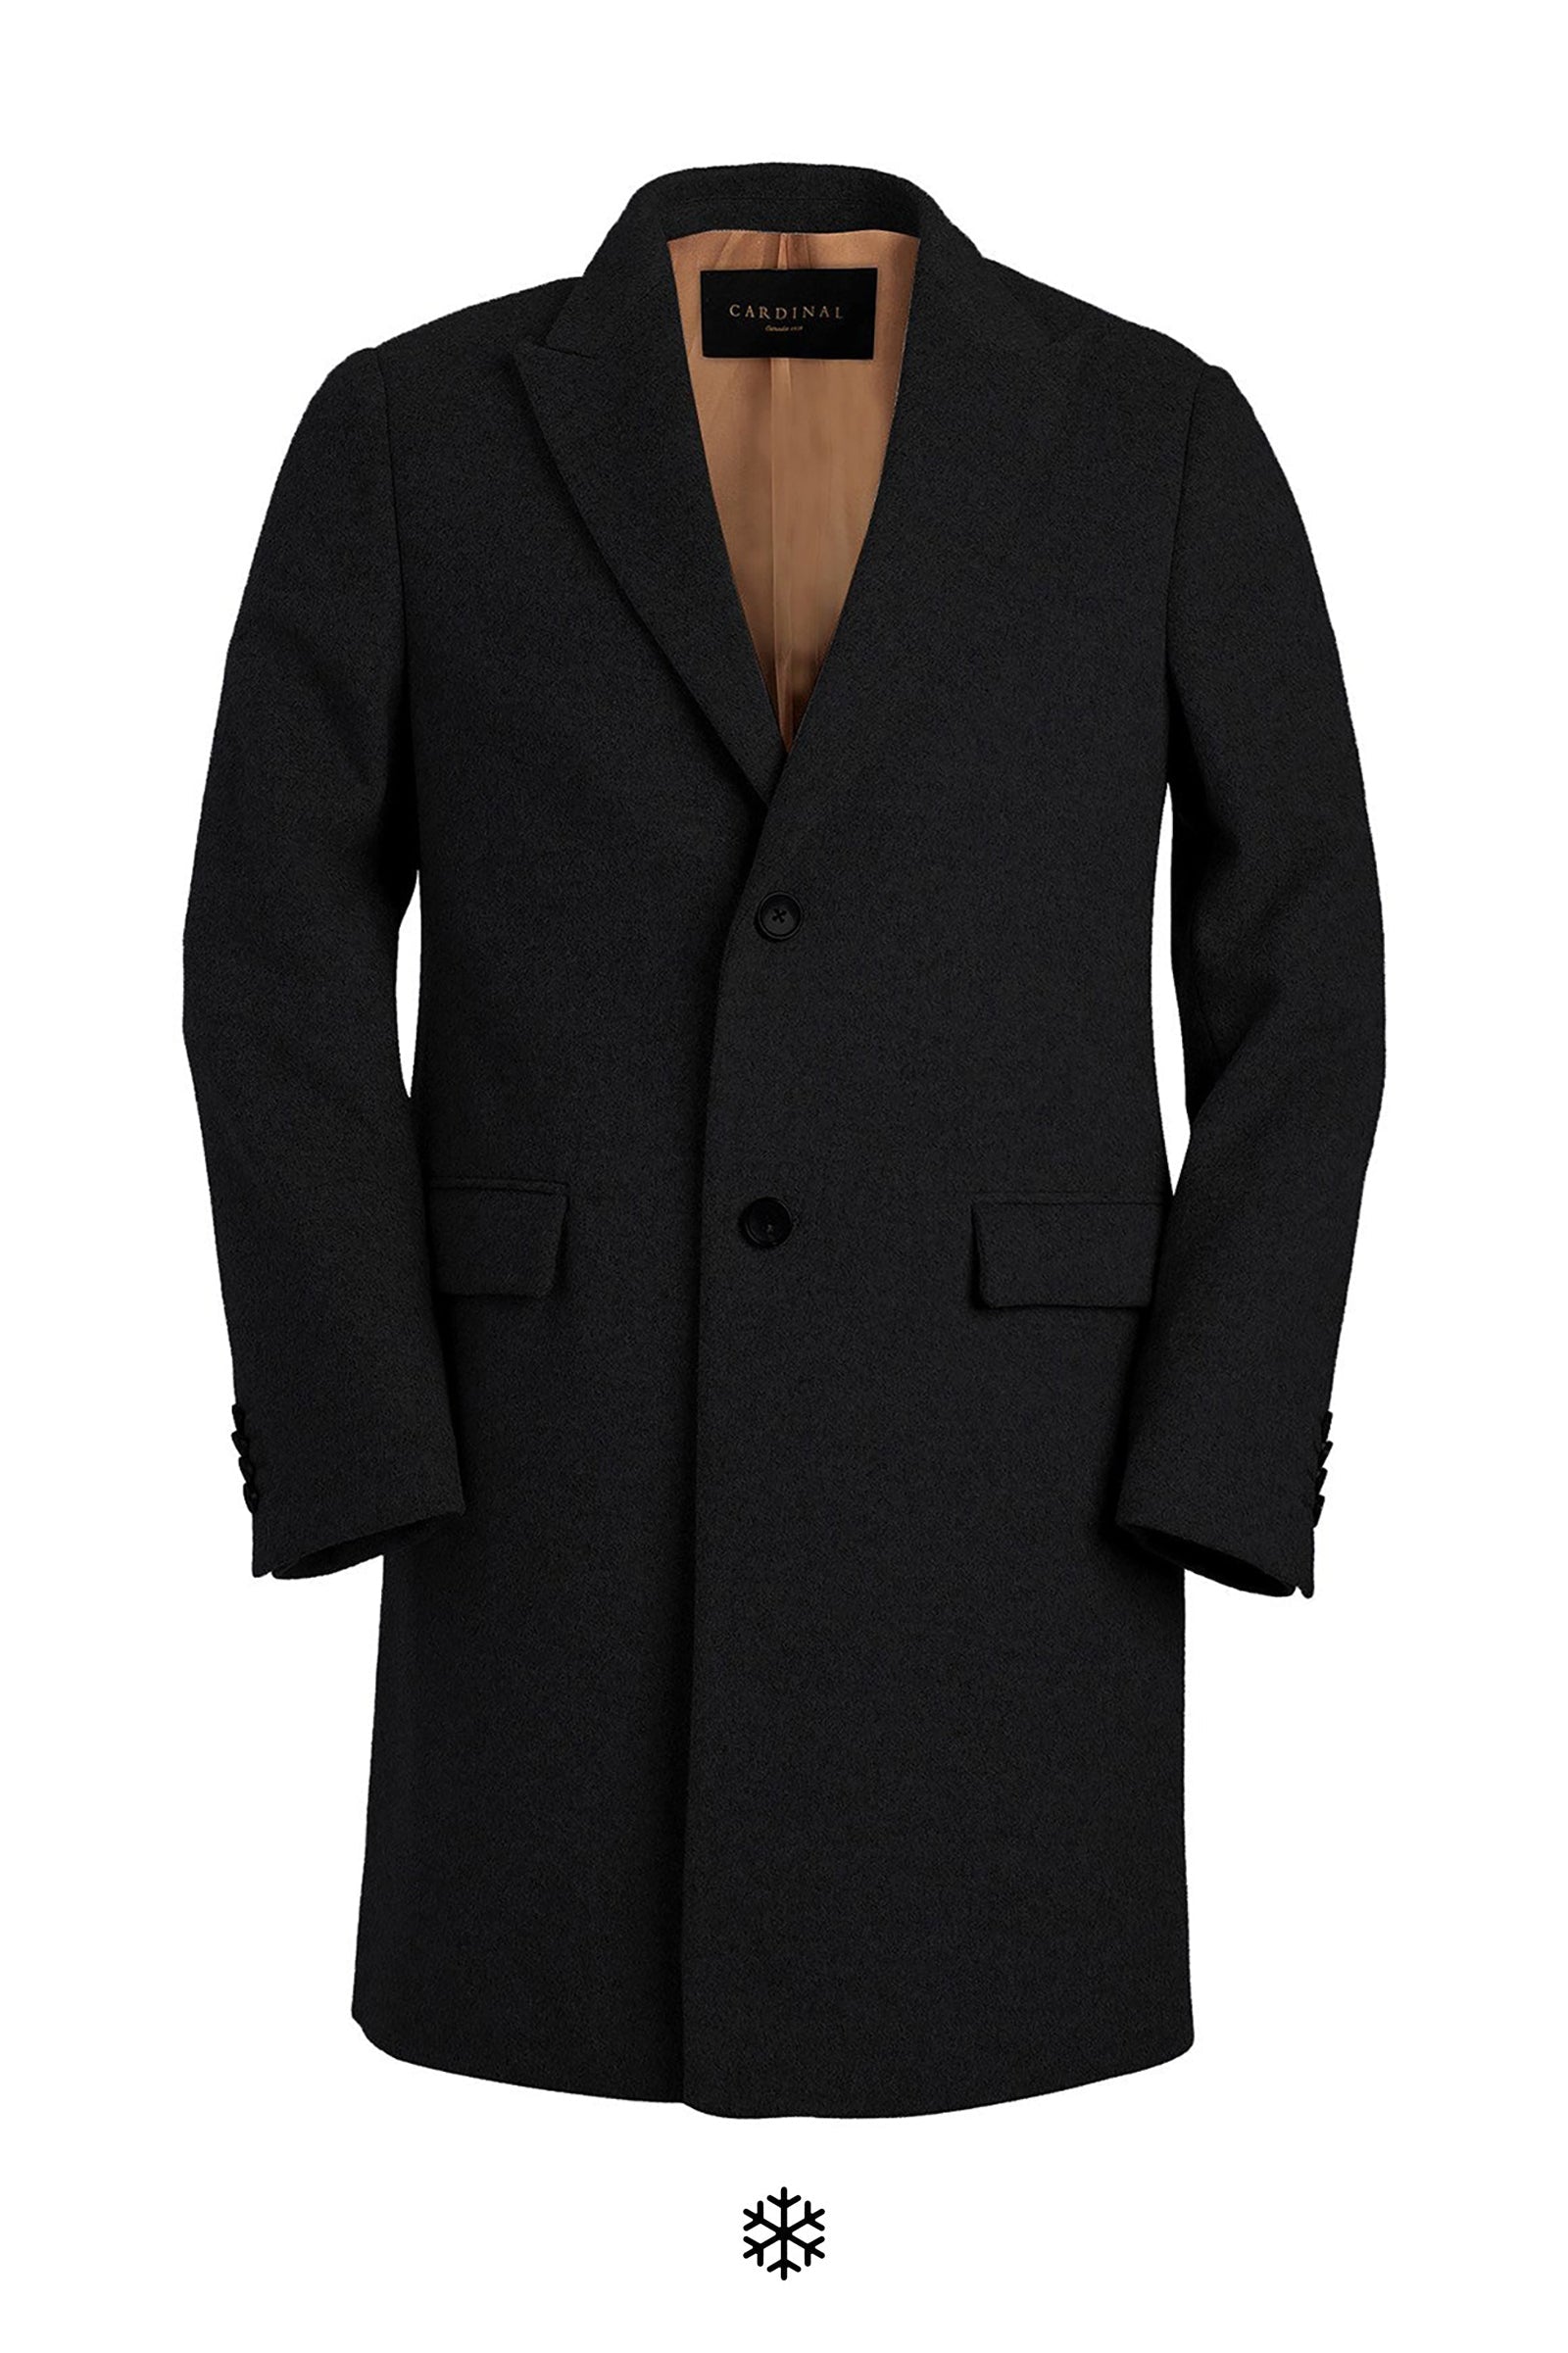 Sutton - Black wool topcoat 38 inch length